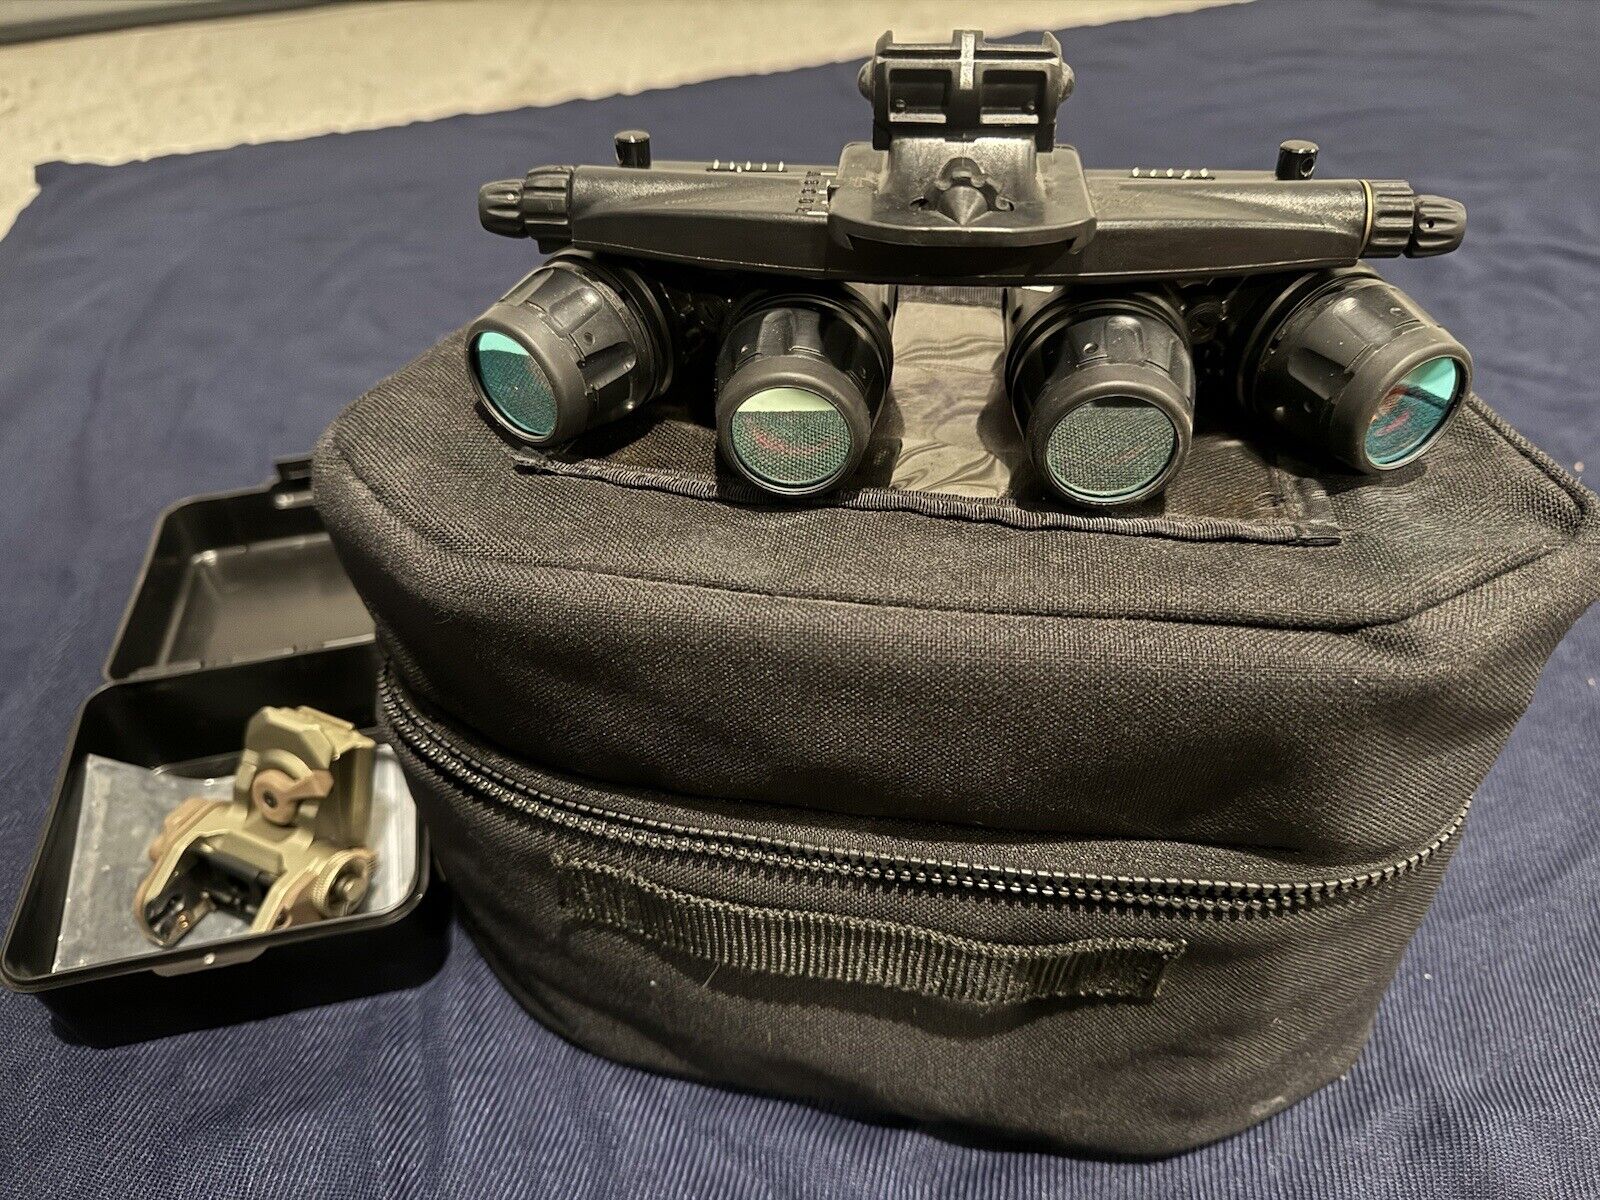 Anvis 10 PNVG Panoramic Night Vision Goggles (rare) with mount